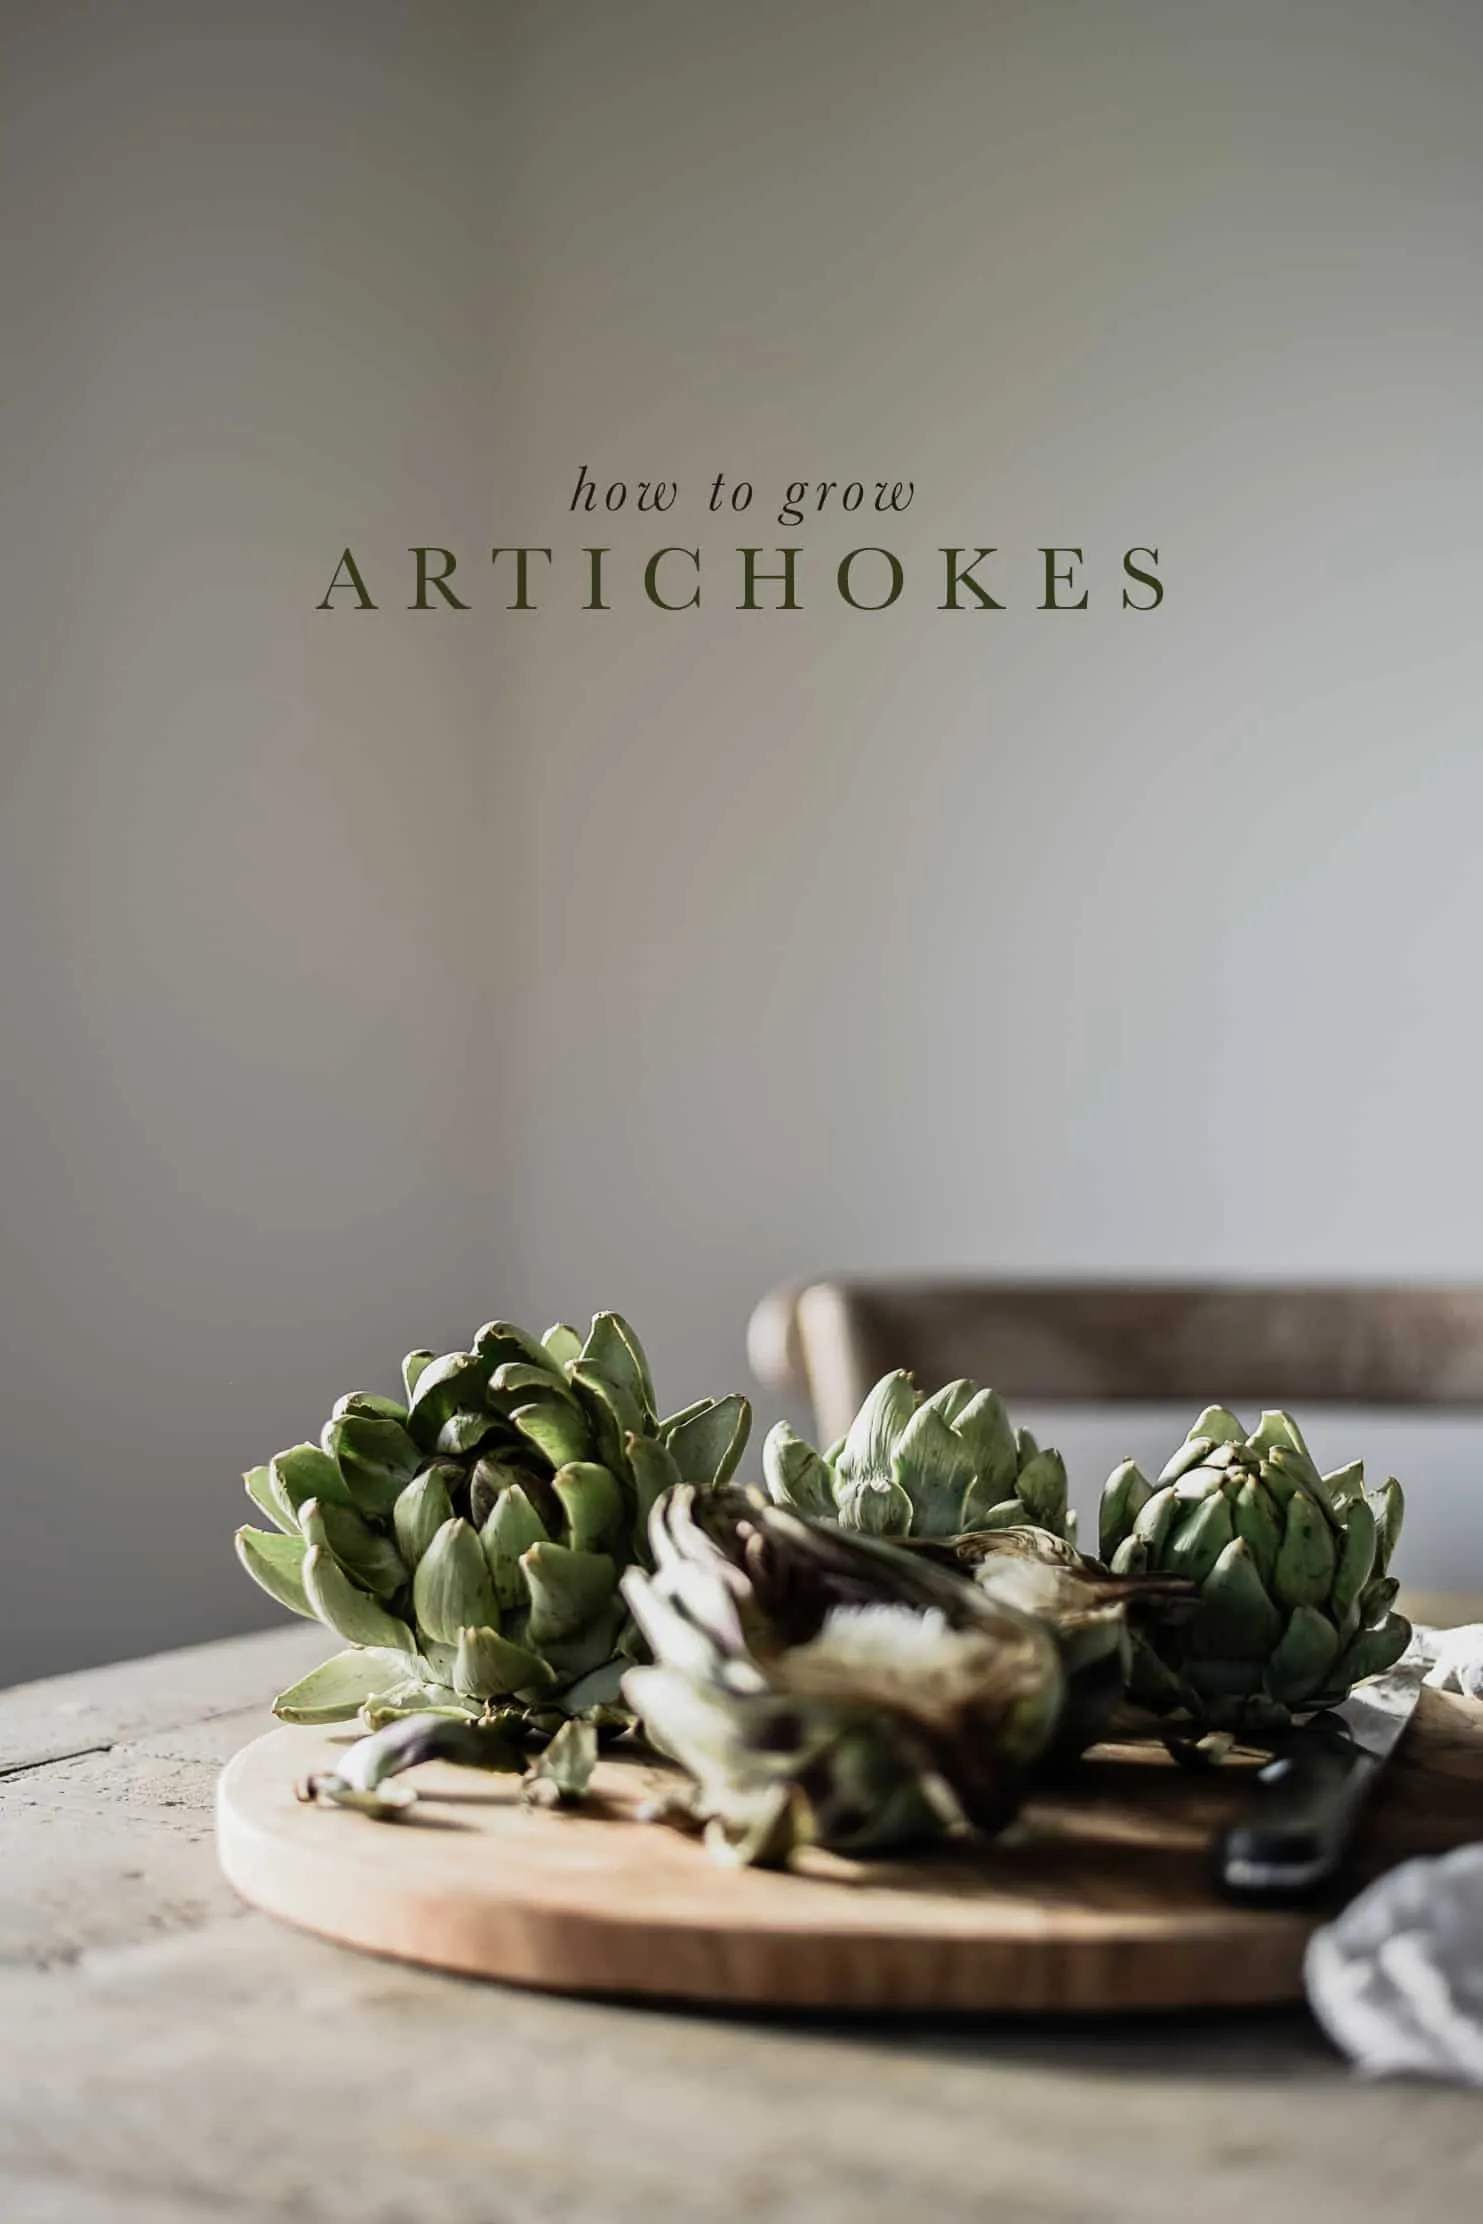 Artichokes are a hearty vegetable that can be grown in any climate, and enjoyed throughout fall! Follow this guide to learn how to grow artichokes in your garden! 